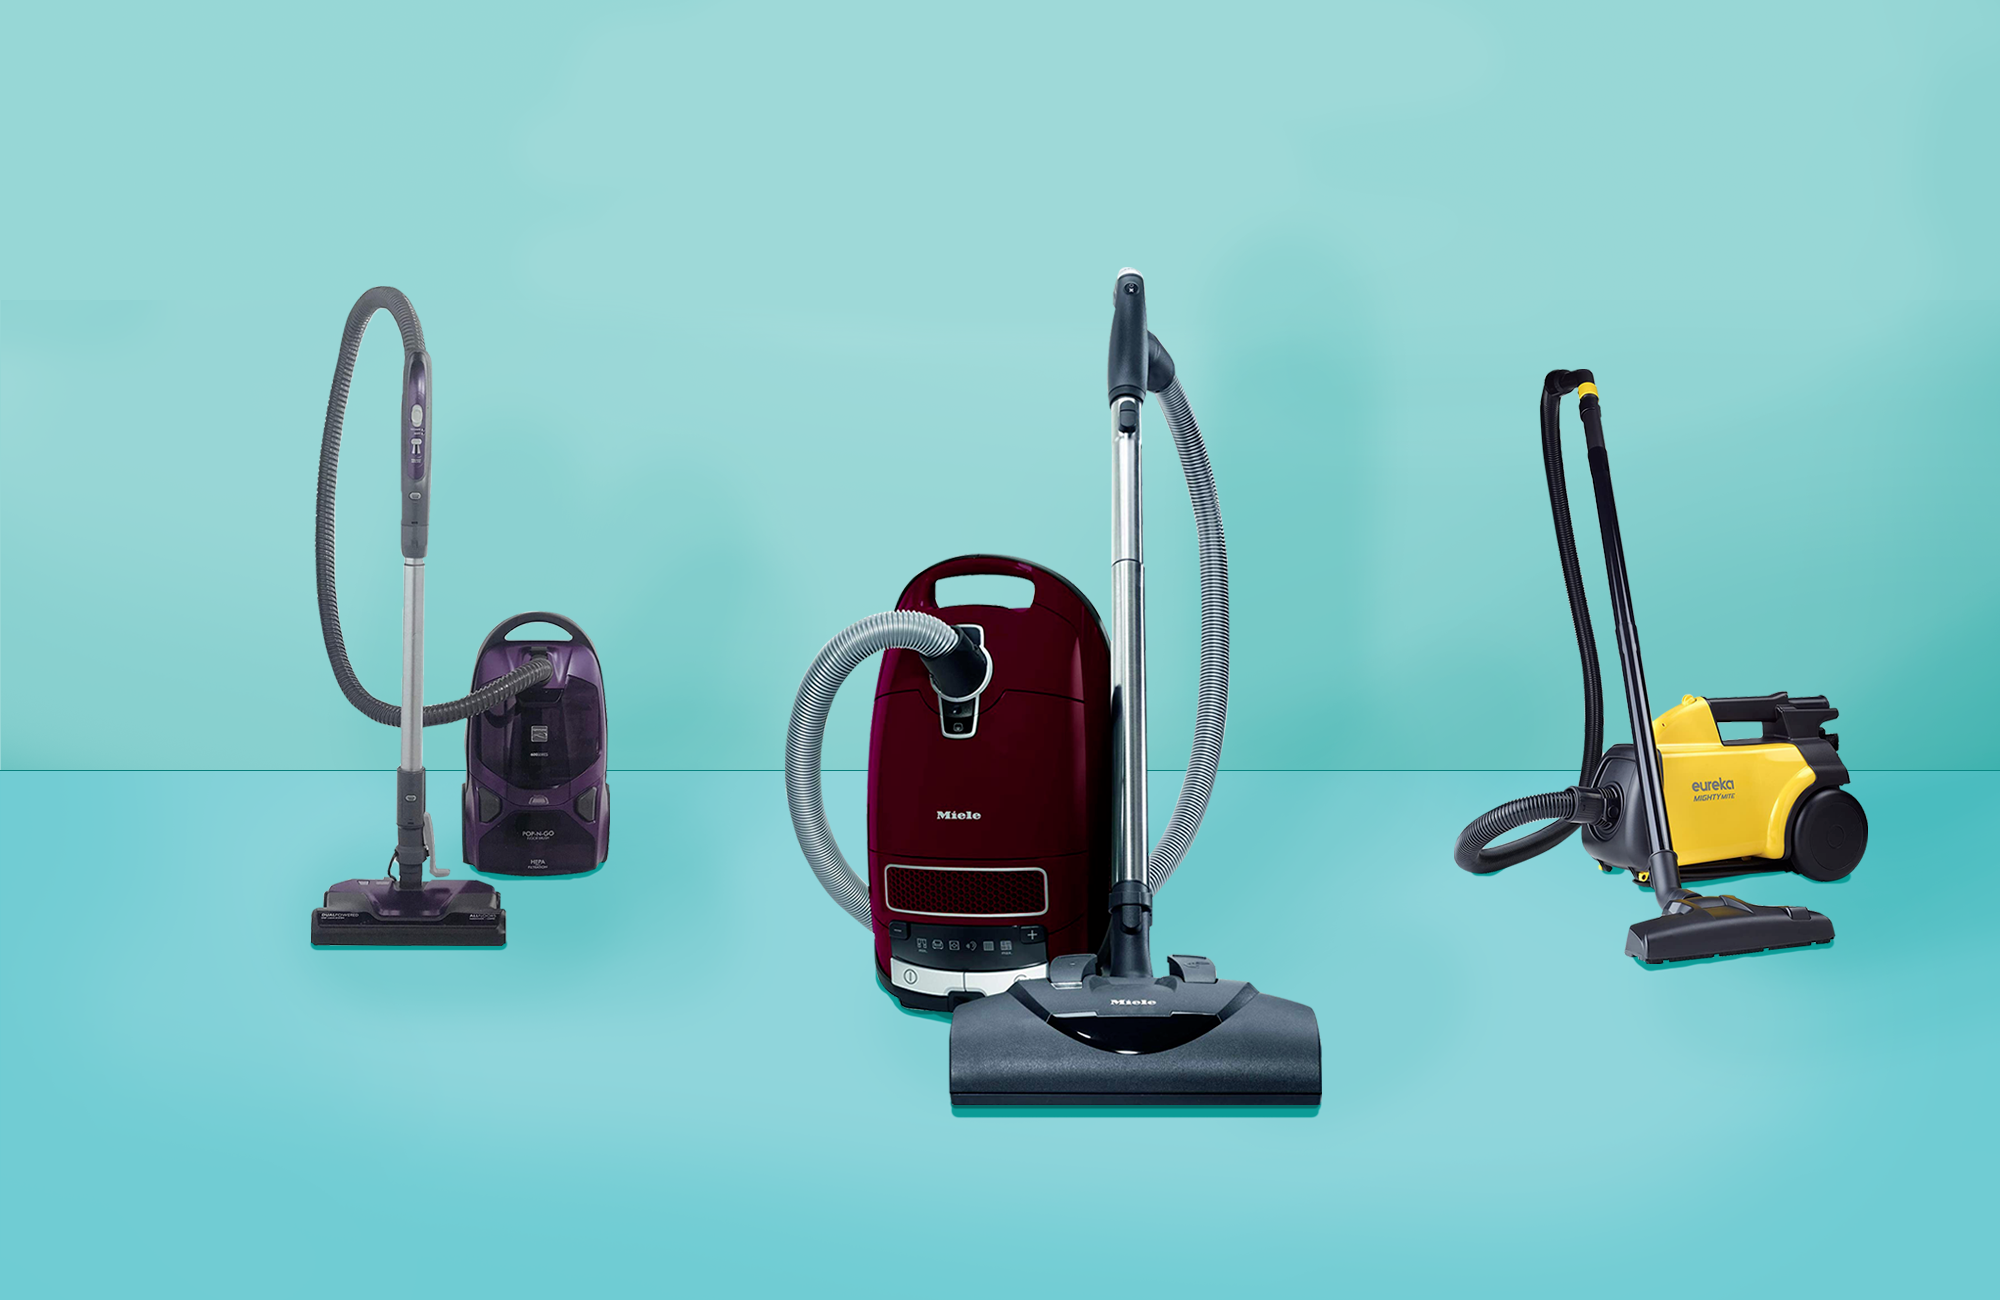 8 Best Canister Vacuums for 2020 - Top 